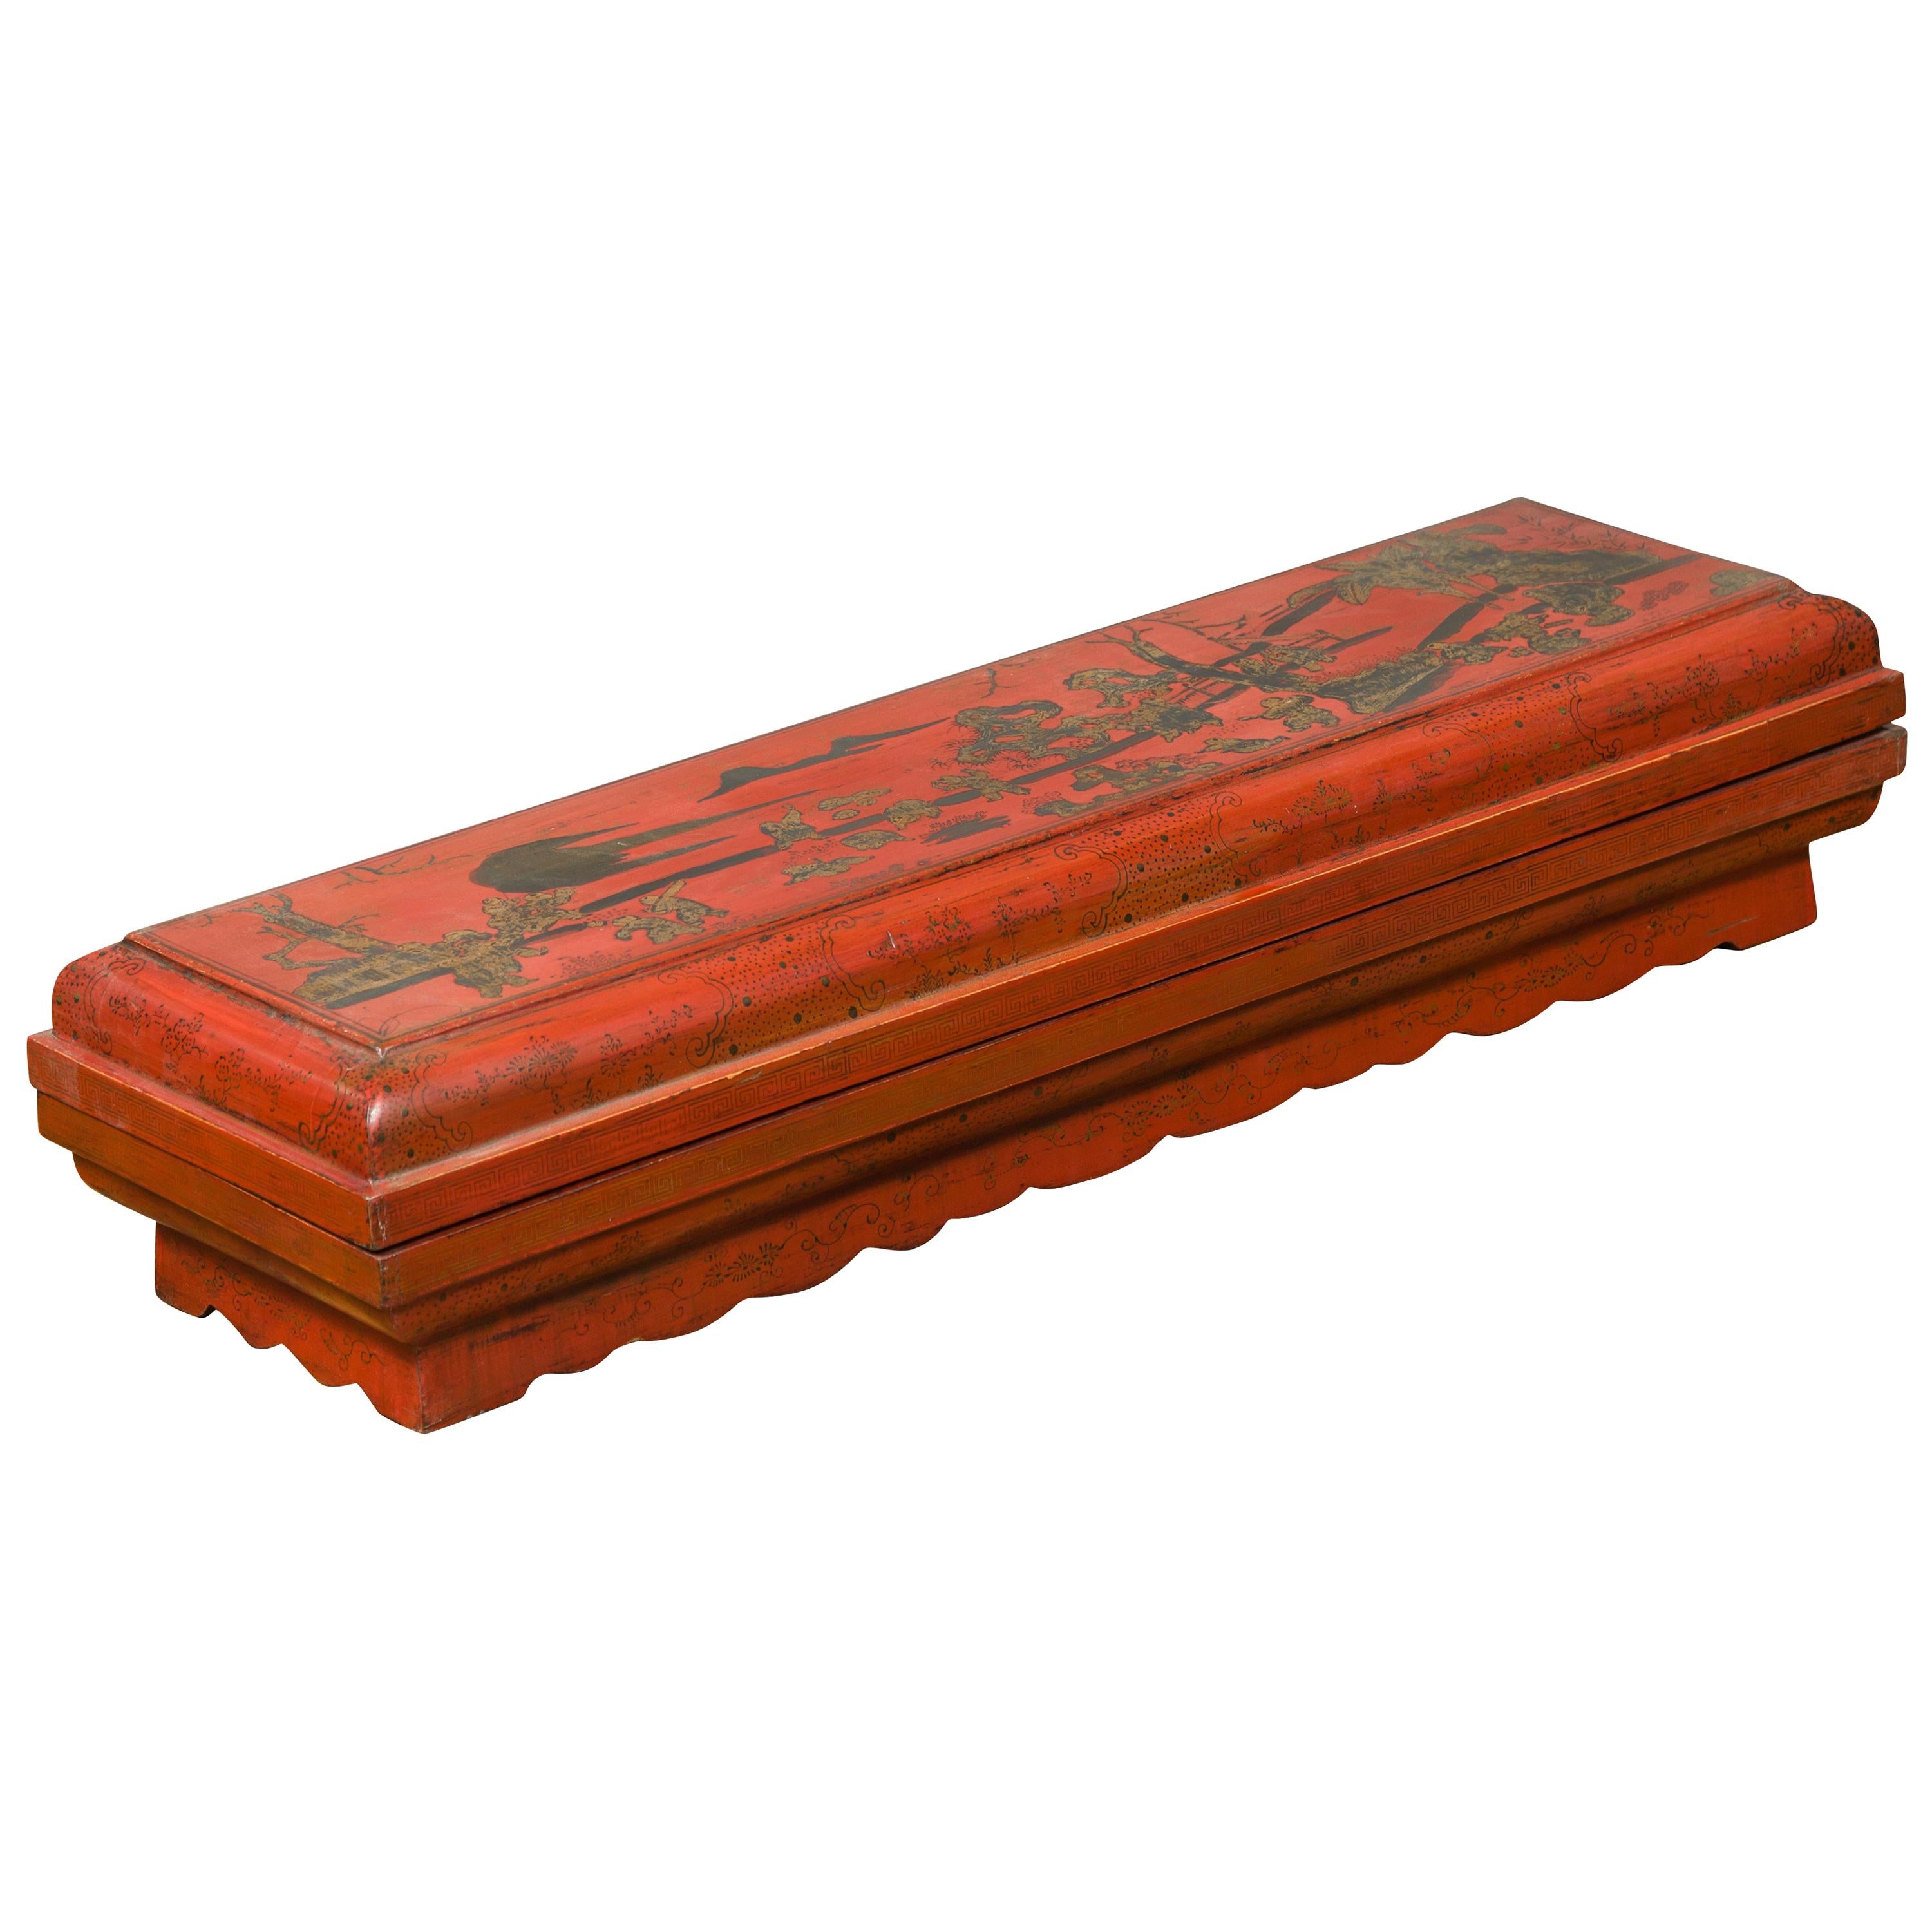 Qing Dynasty Red Lacquered Scroll Box with Distressed Gold Chinoiserie Décor For Sale